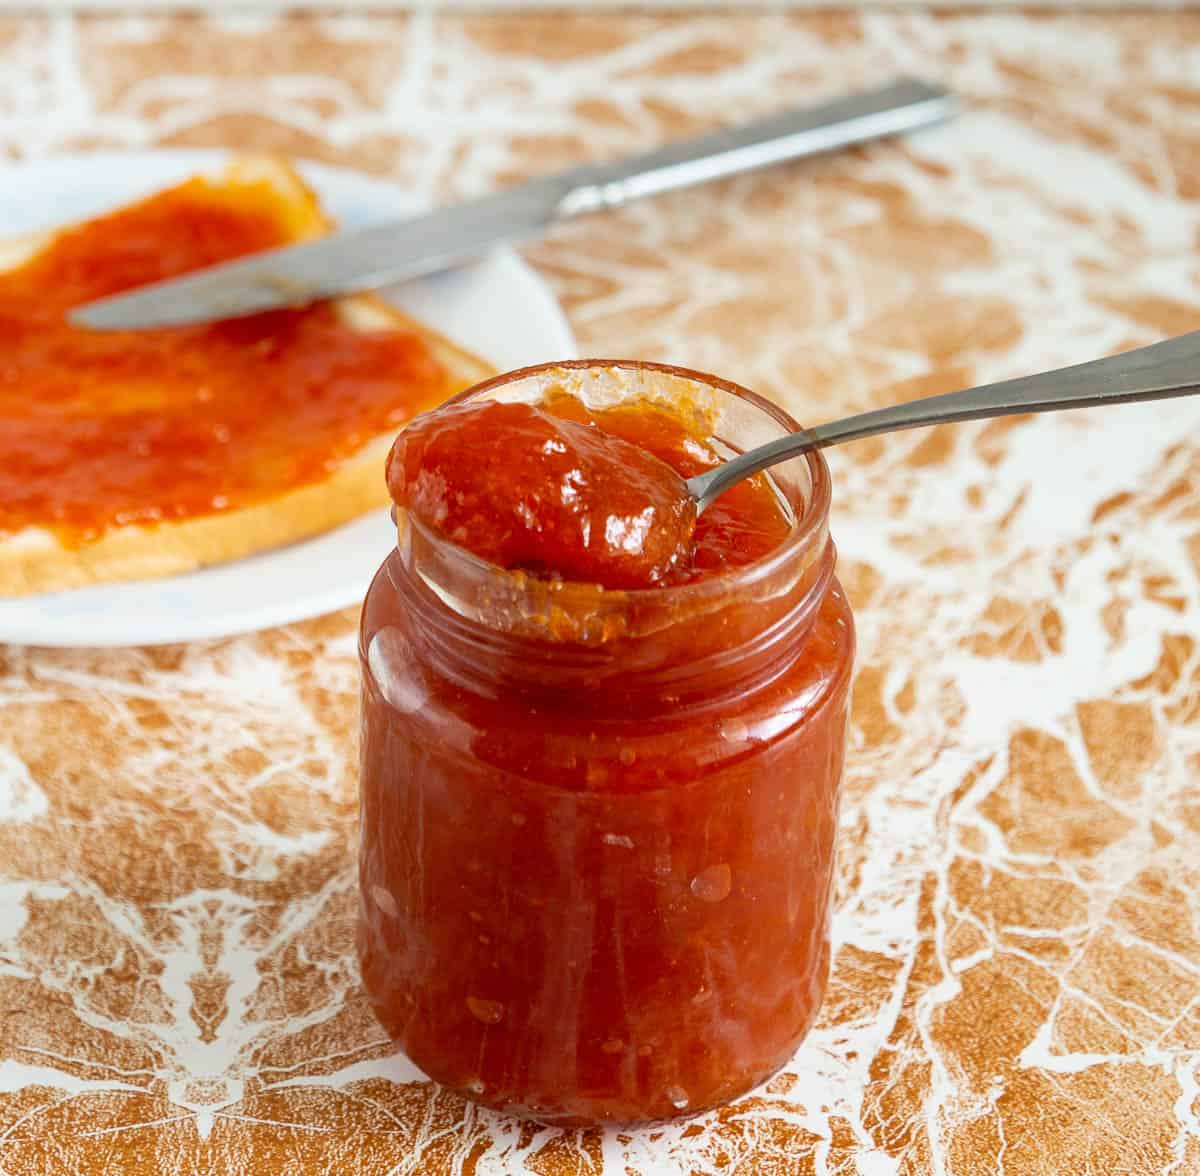 A jar of apricot peach jam and a slice of bread with jam on a plate with a knife.